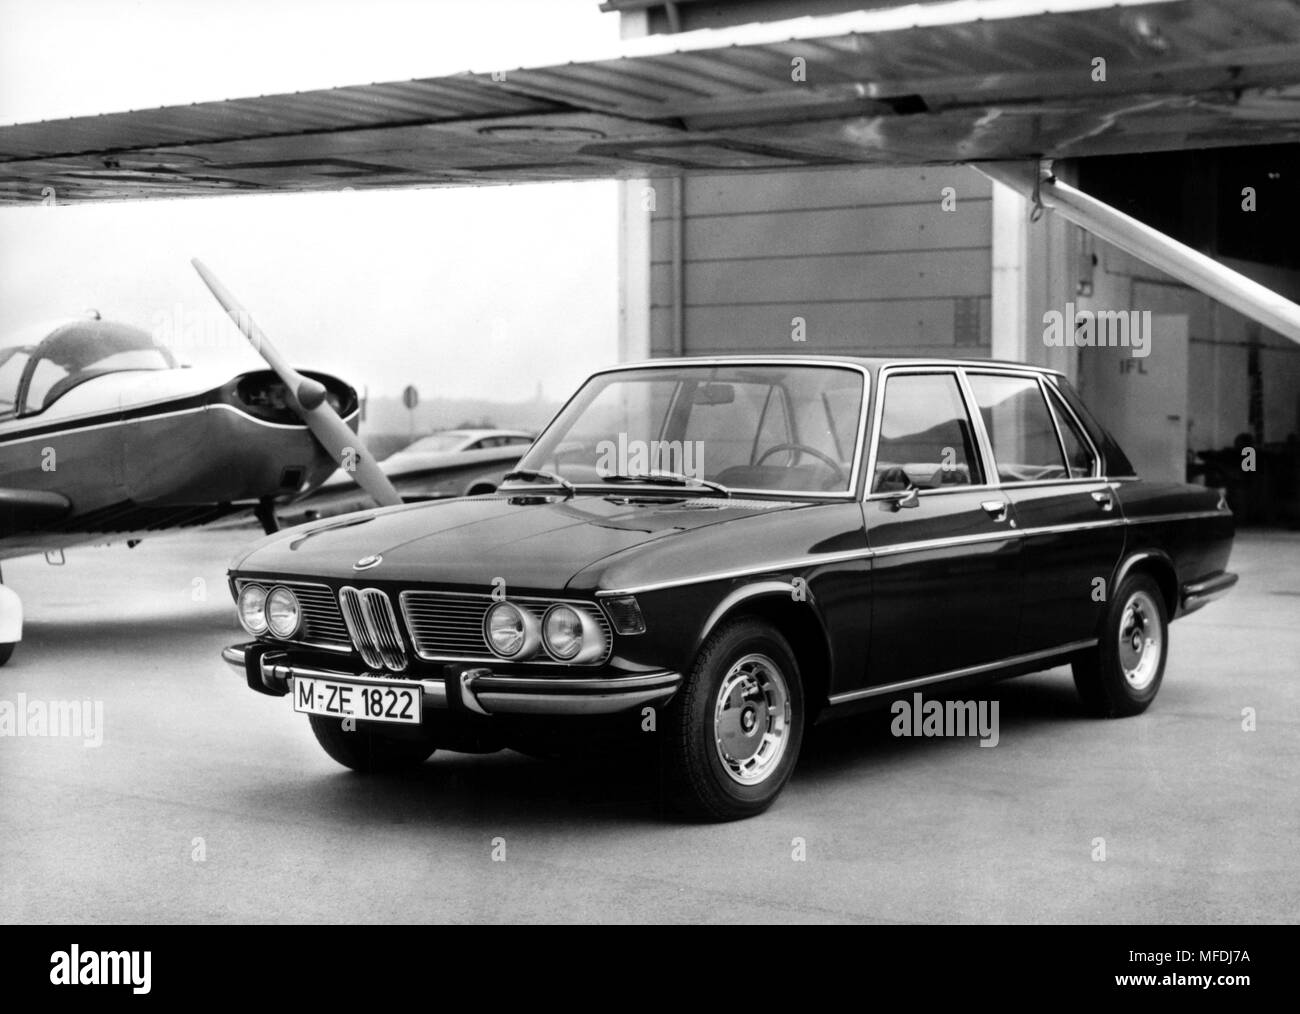 A BMW of the type 2500 with 150 hp. The vital six-cylinder gives it identical even as a BMW 2800 with 170 hp. (undated image) Technical data: Occupant cabin designed as safety cell. Six-cylinder engine with 2.5 or 2.8 liter capacity and 150 or 170 hp power, overhead camshaft, 7-speed crankshaft with 12 versus weights, two carburetors. Homokinwtische joints on the rear axle. Independent suspension on all wheels. Front Federbeiafterse with wishbone; rear Federbeiafterse with high-laid coil springs and oblique long swing. Double tube Telekopstossdampfer. Dual dual-circuit brake. Zweeigelenk-Siche Stock Photo